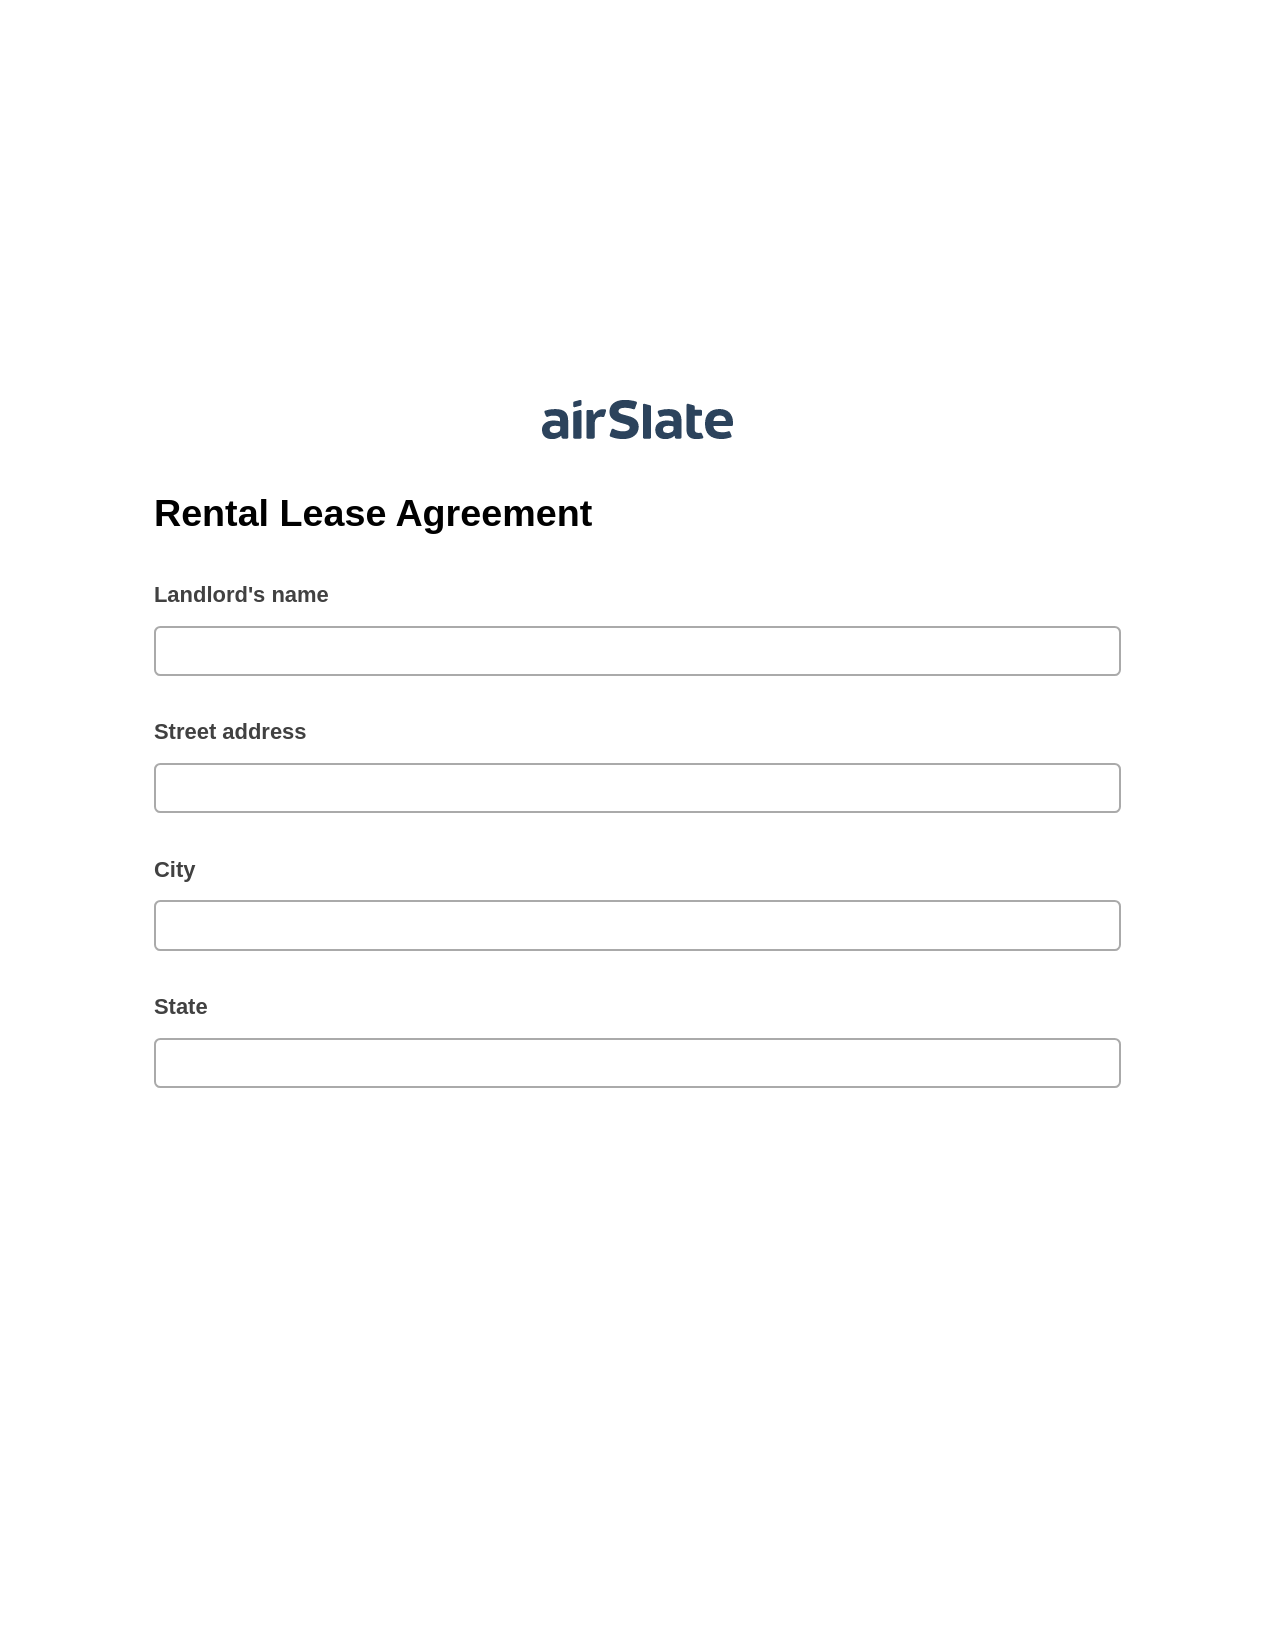 Rental Lease Agreement Pre-fill from Excel Spreadsheet Bot, Update Salesforce Record Bot, Slack Two-Way Binding Bot